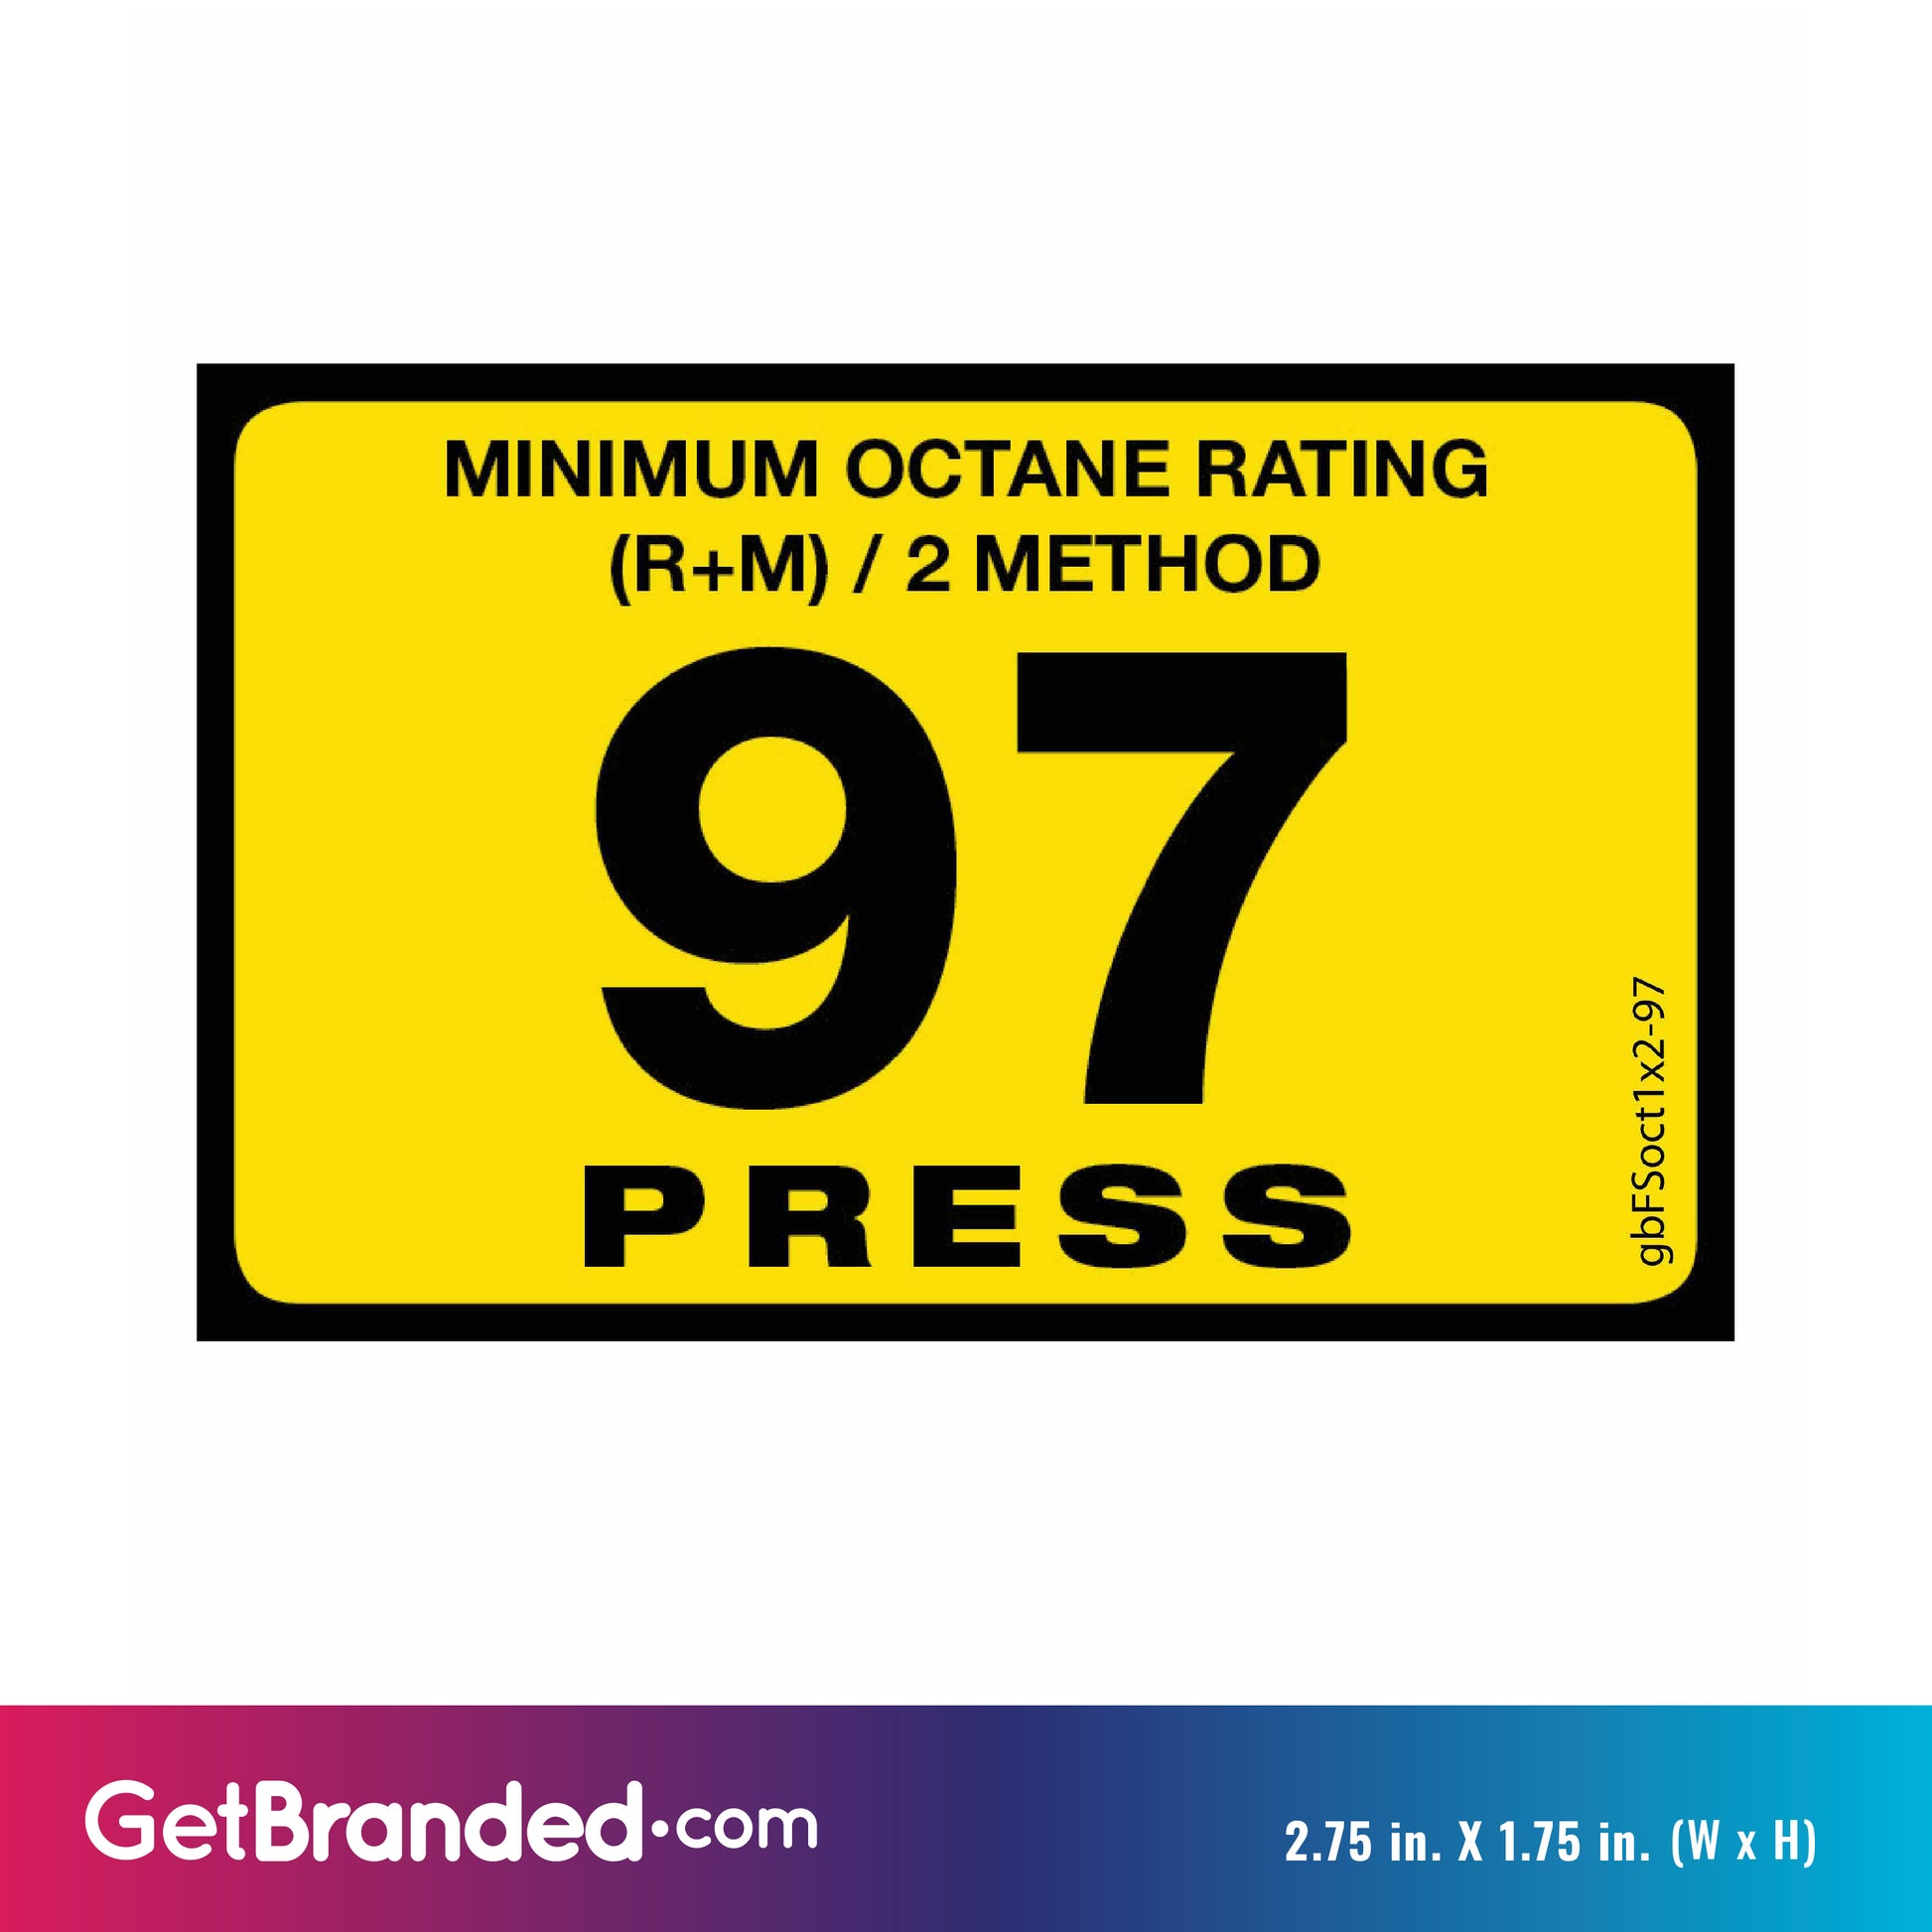 97 Press Octane Rating Decal. 1 inch by 2 inches size guide.